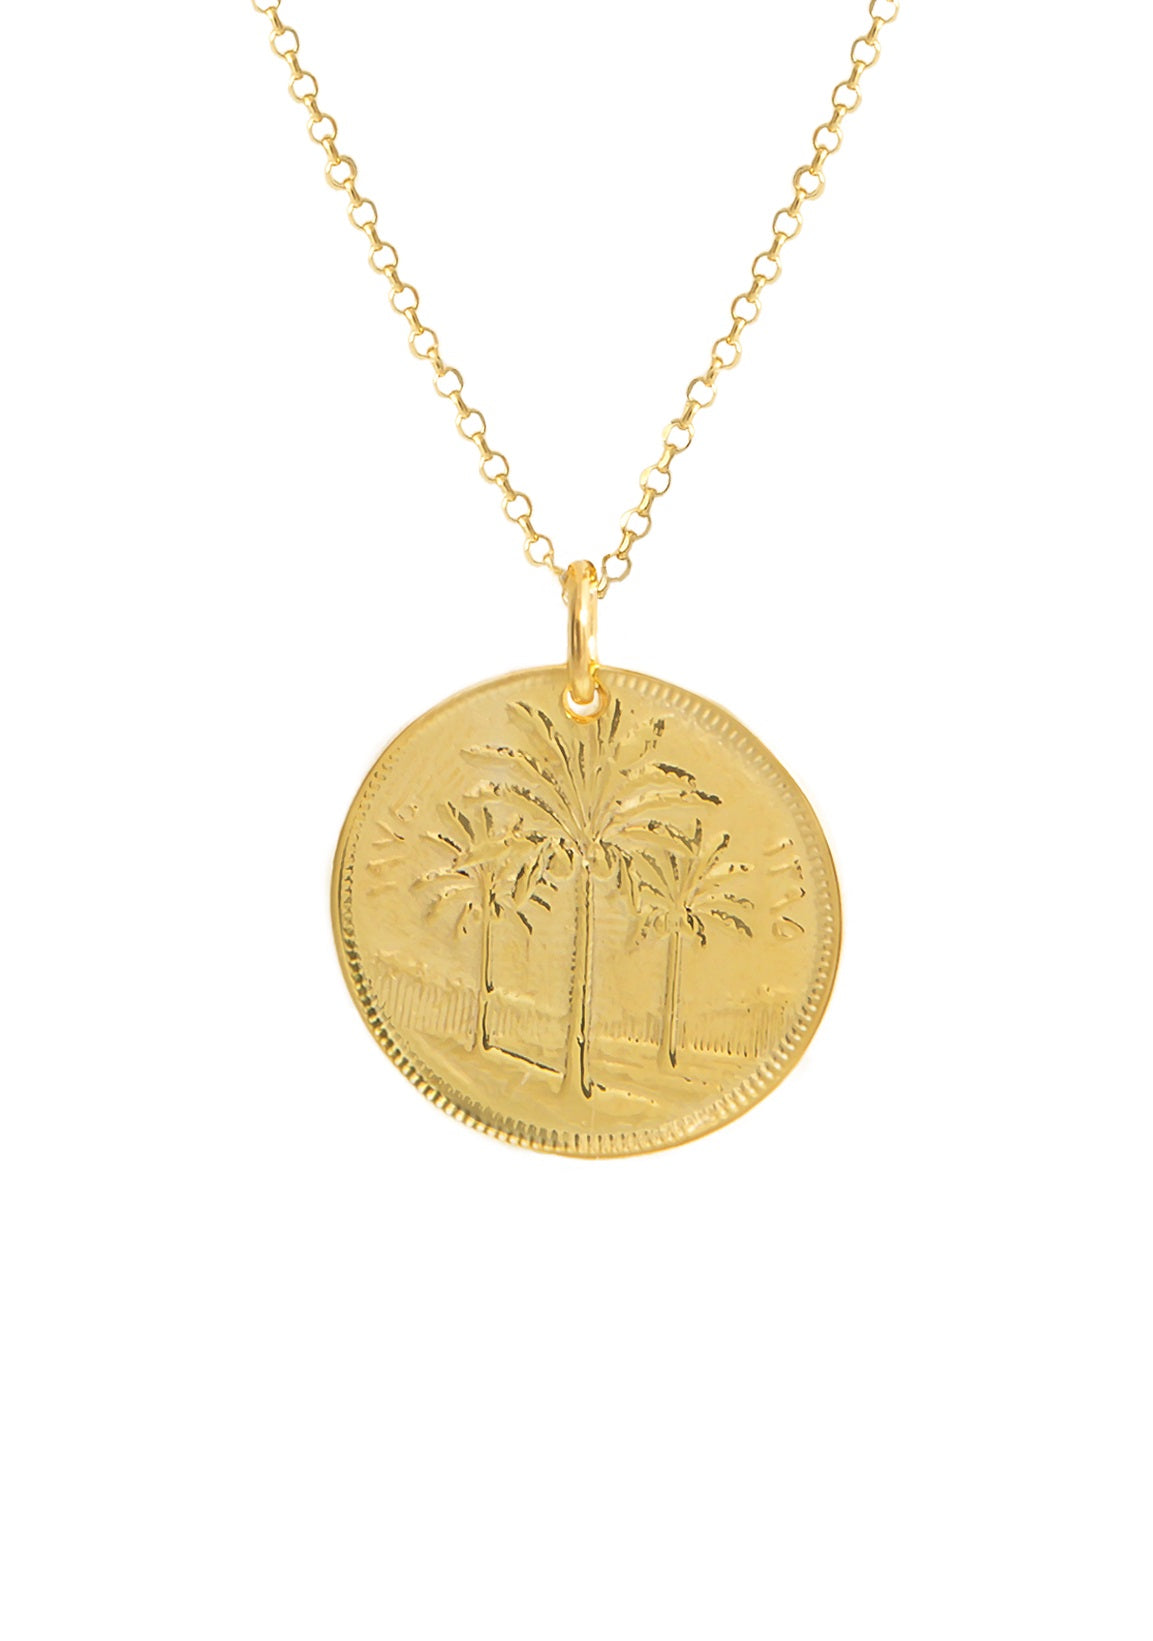 The Date Palm Coin - PRE ORDER